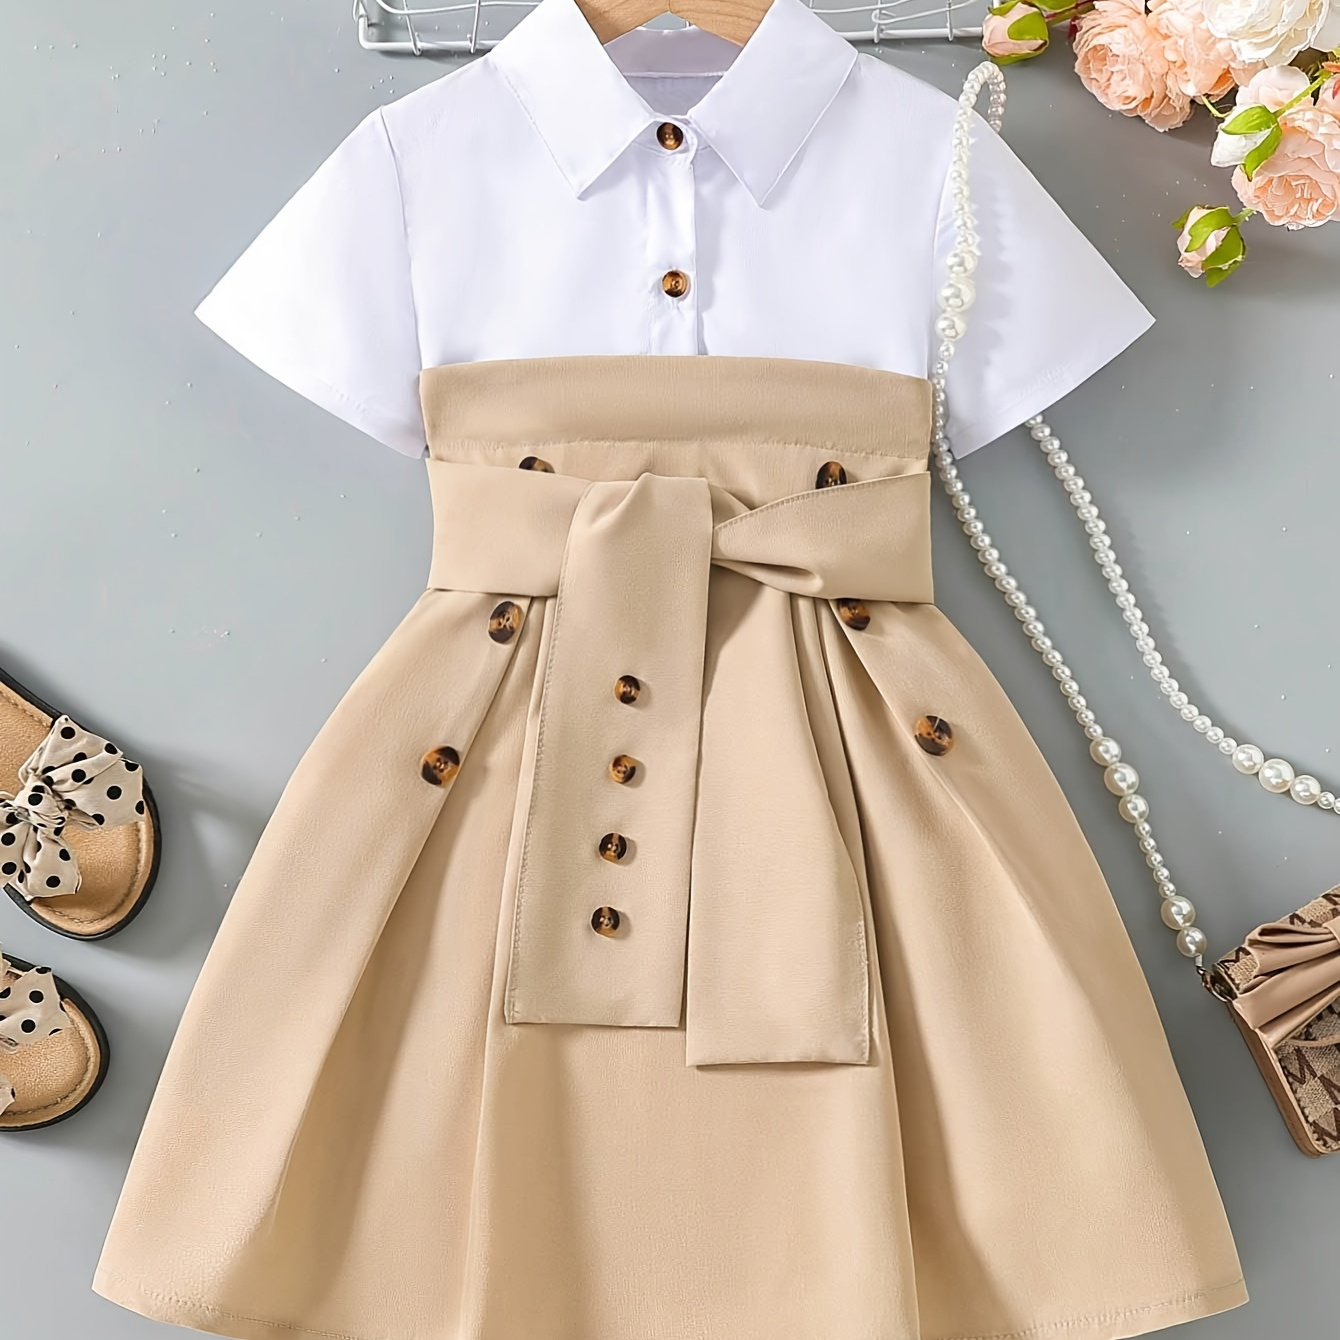 

Girls Elegant Patchwork Short Sleeve Shirt Dress, Casual Dresses For Holiday/ Summer Going Out